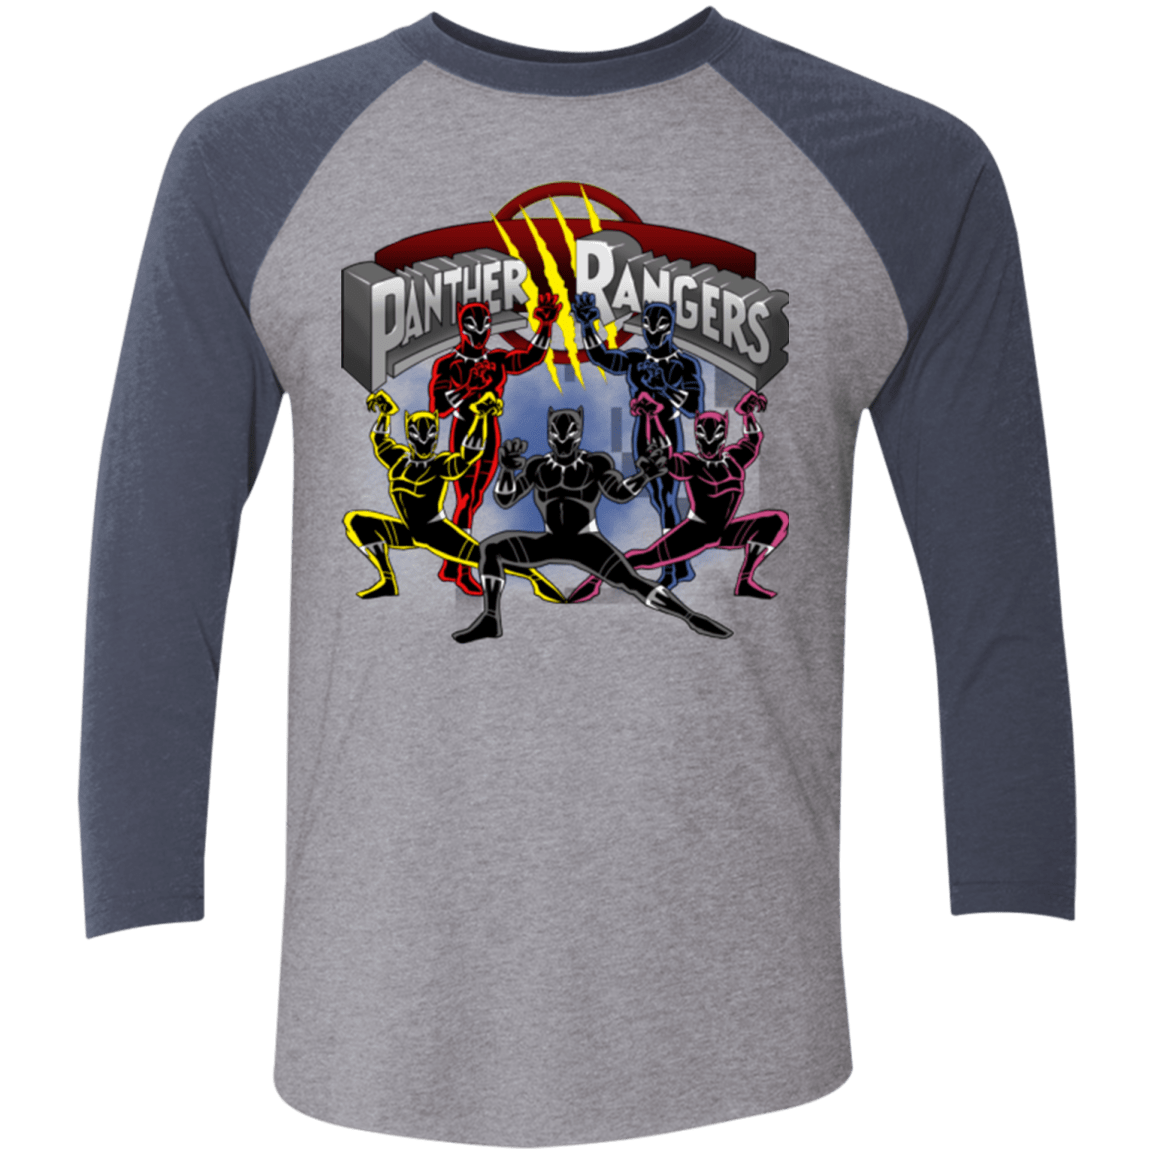 T-Shirts Premium Heather/Vintage Navy / X-Small Panther Rangers Men's Triblend 3/4 Sleeve